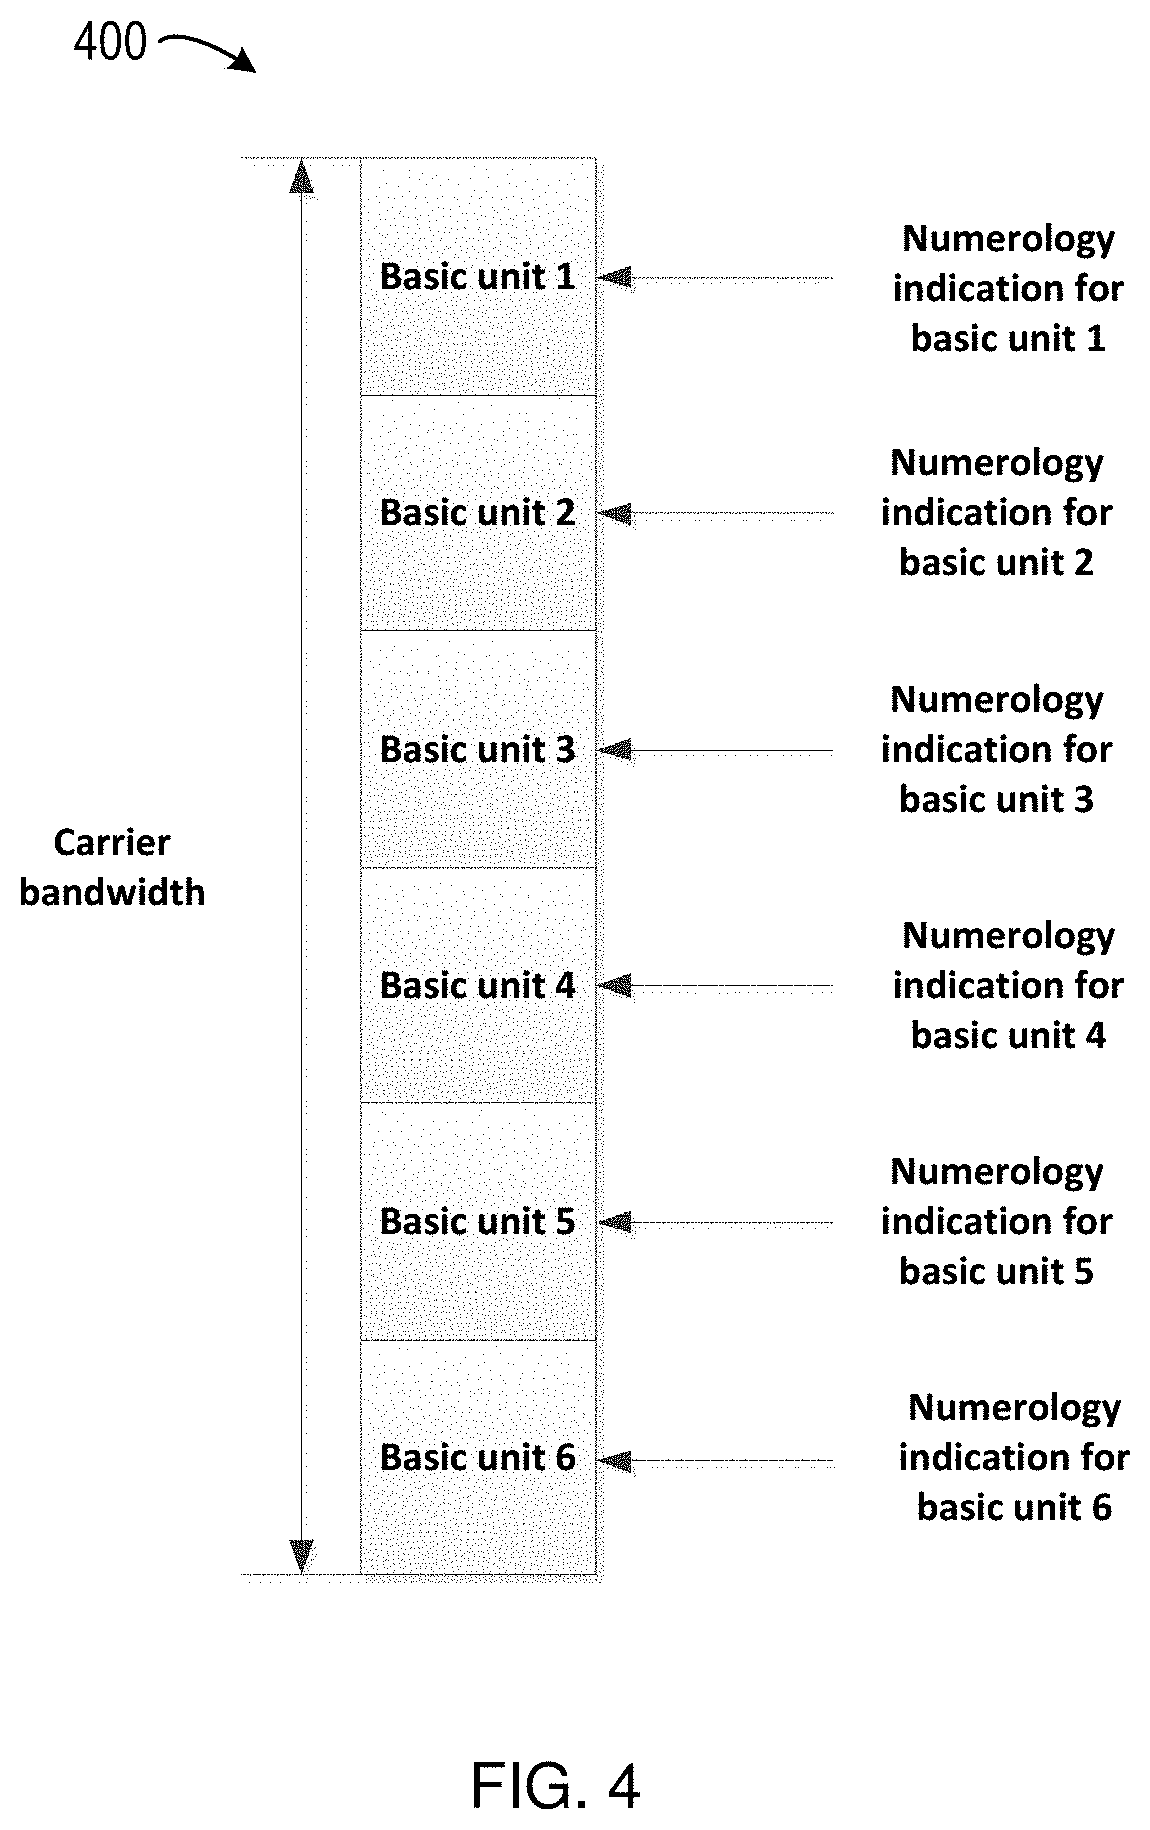 Method and device for indicating numerology